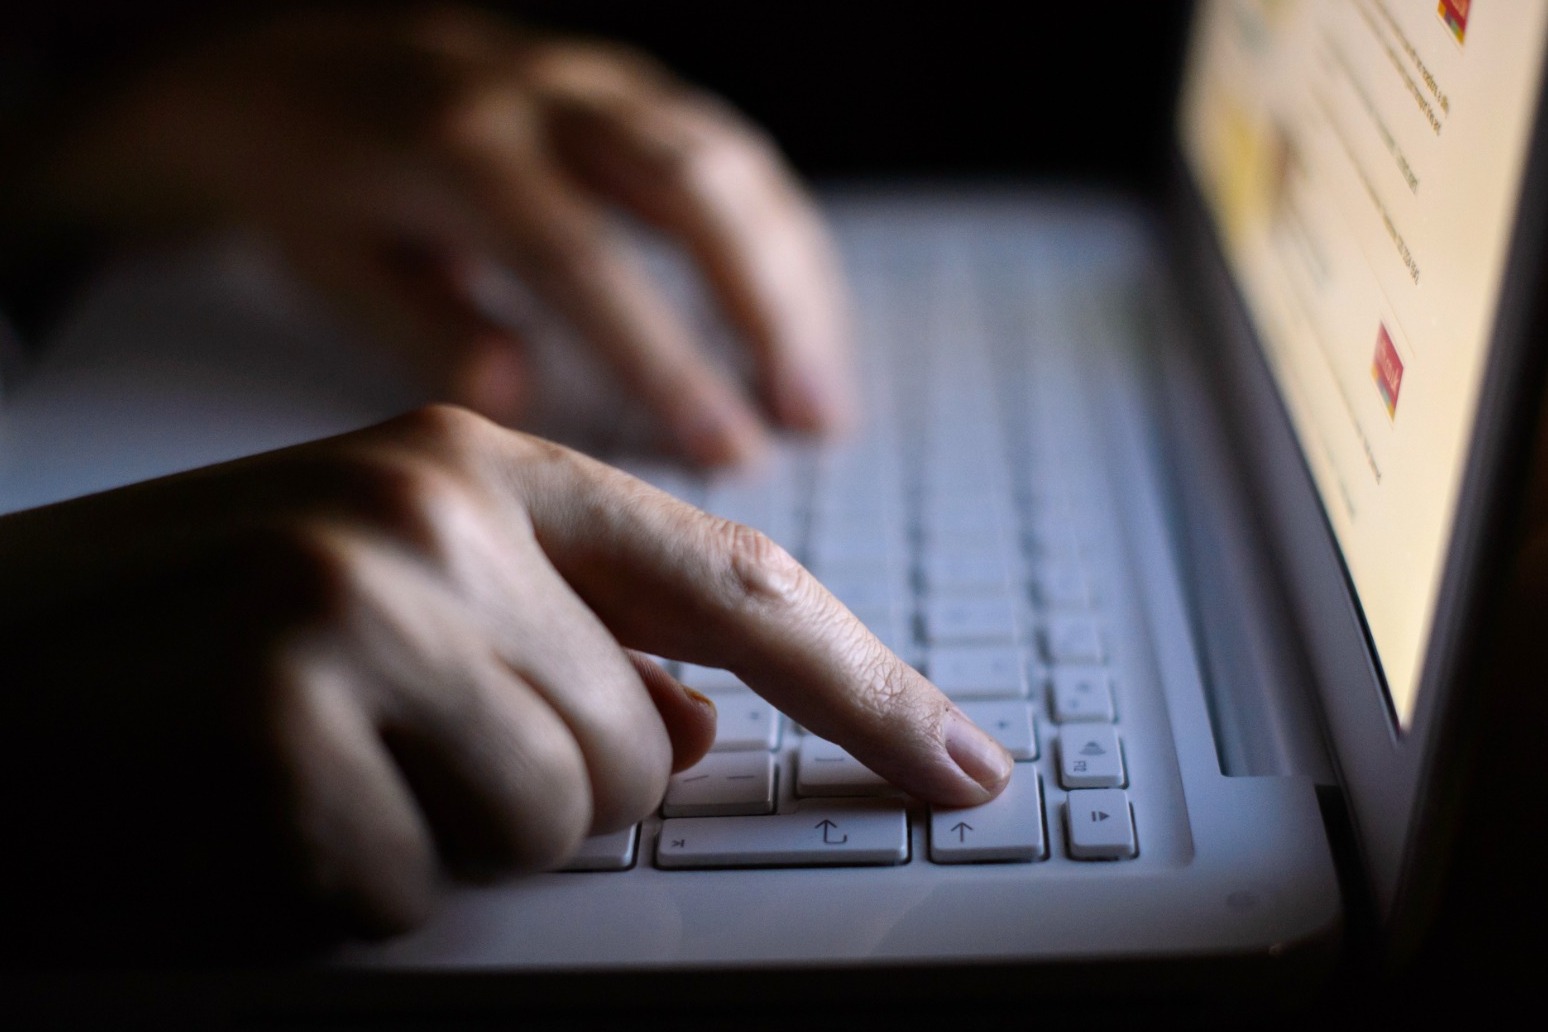 Internet safety reforms clear first Commons hurdle as MPs give their backing 